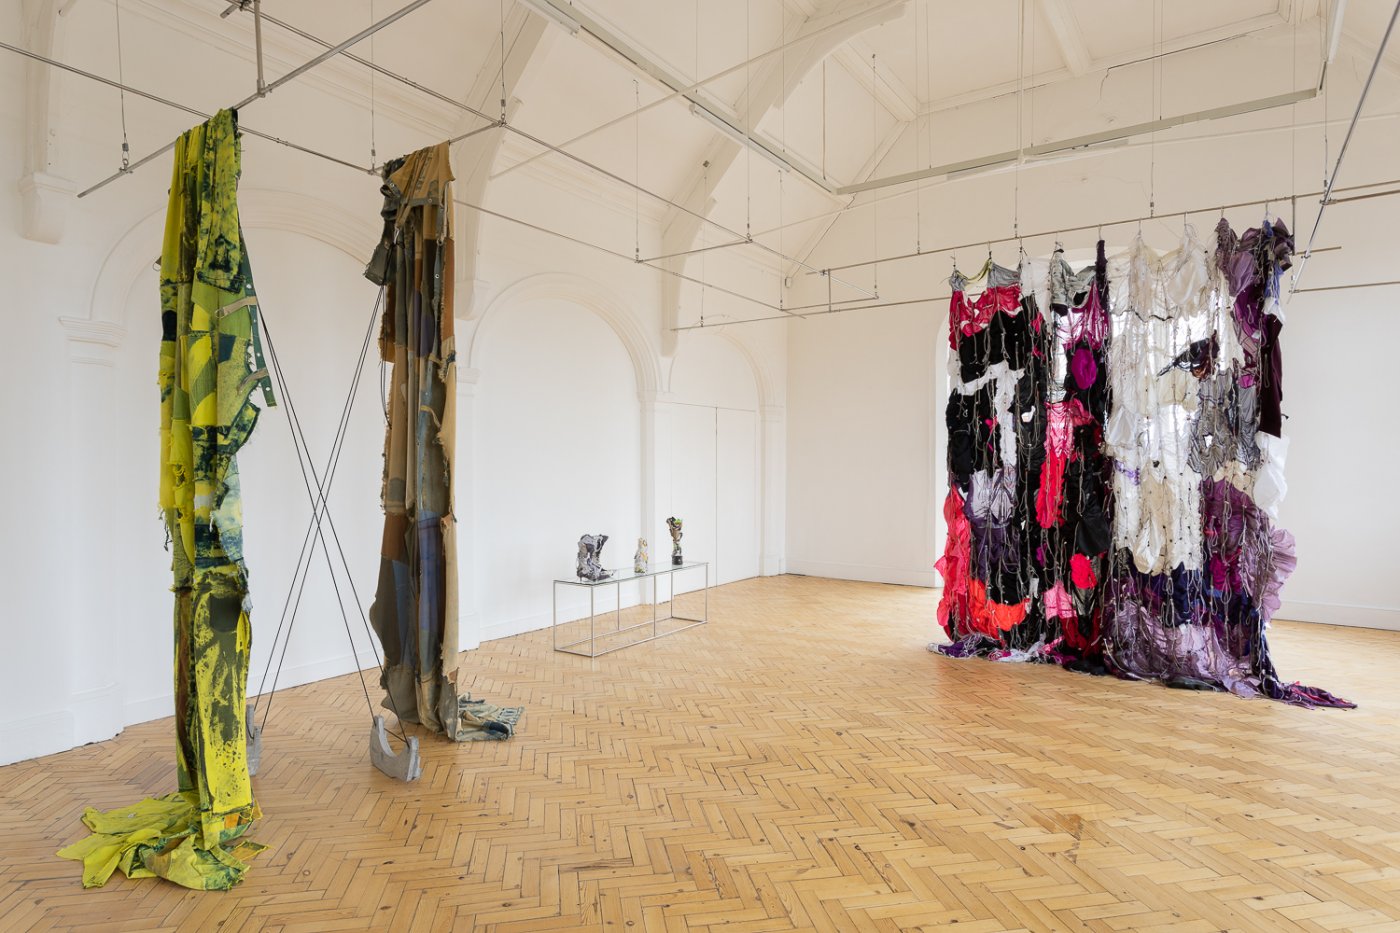 Installation image for Tenant of Culture: Soft Acid, at Camden Art Centre